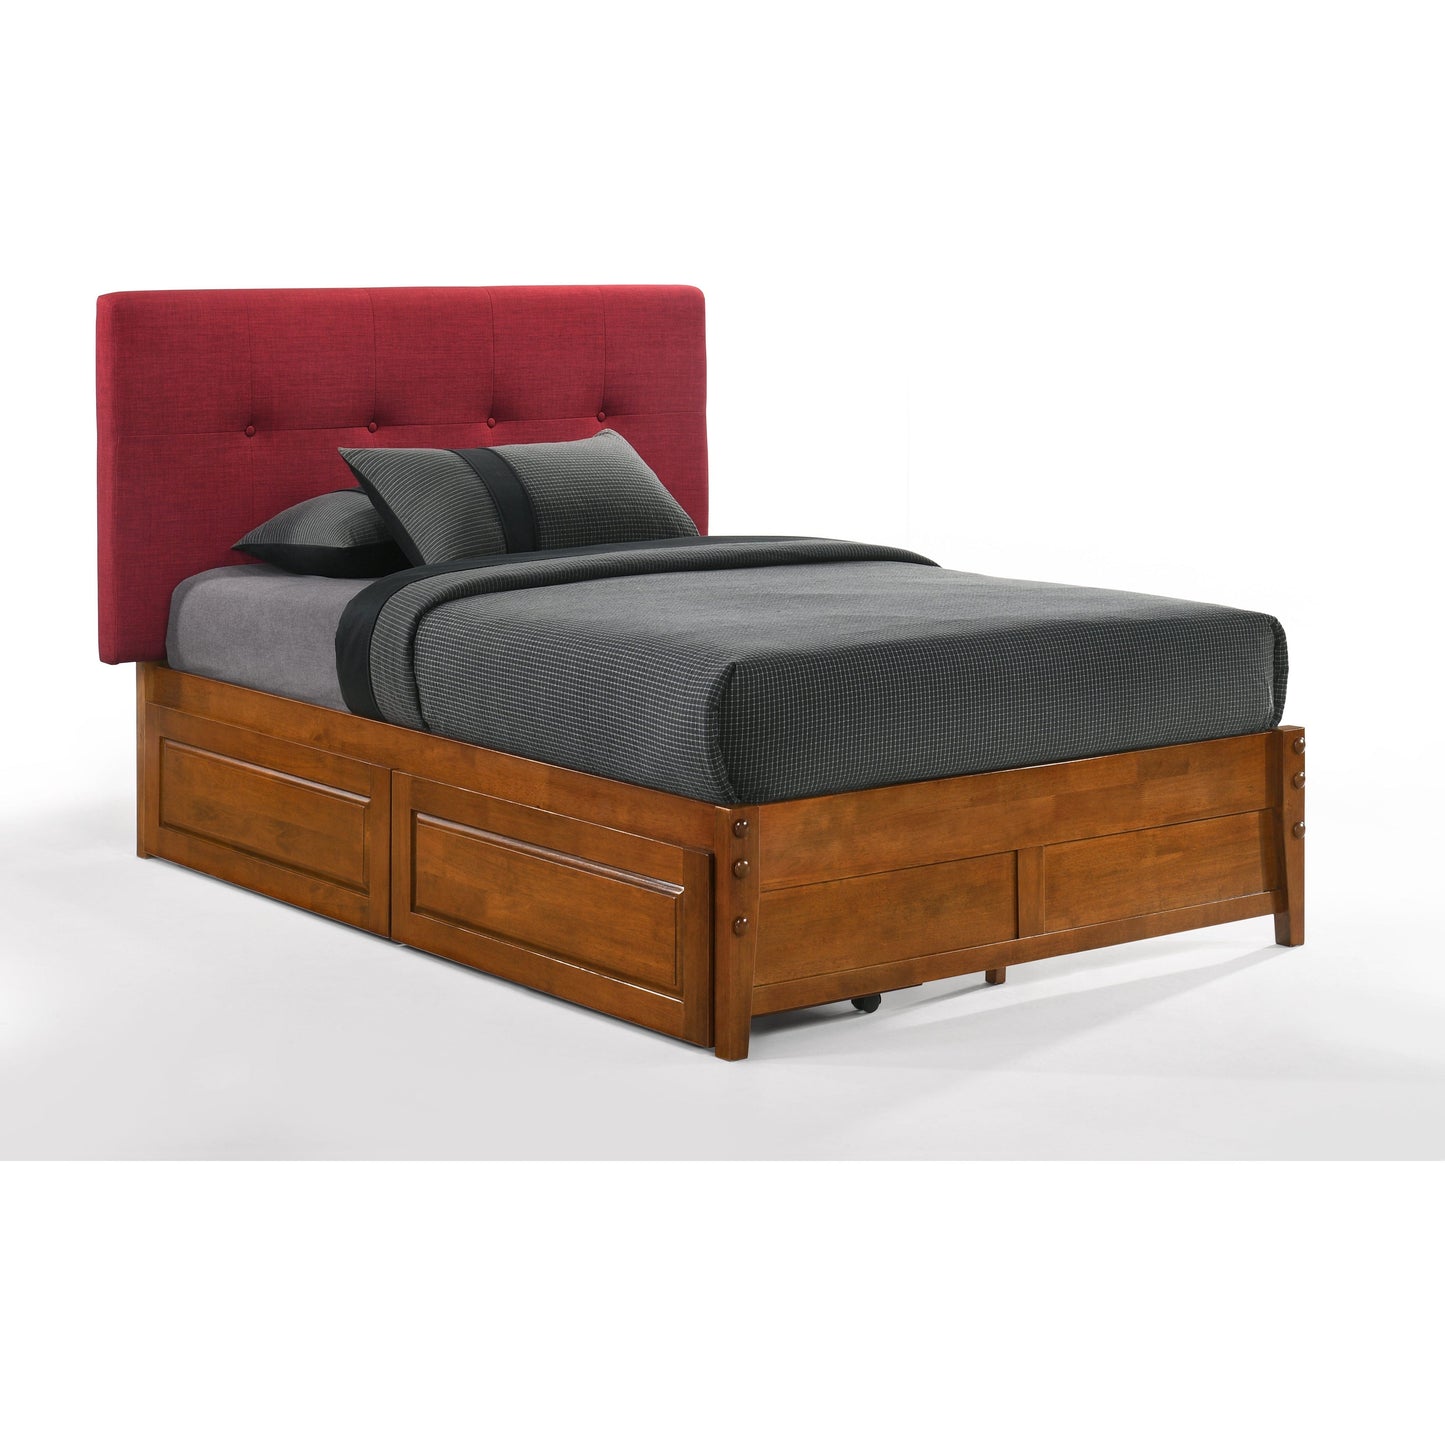 The Bedroom Emporium Paprika Twin Bed in Grey with Cherry Finish Frame (K Series)